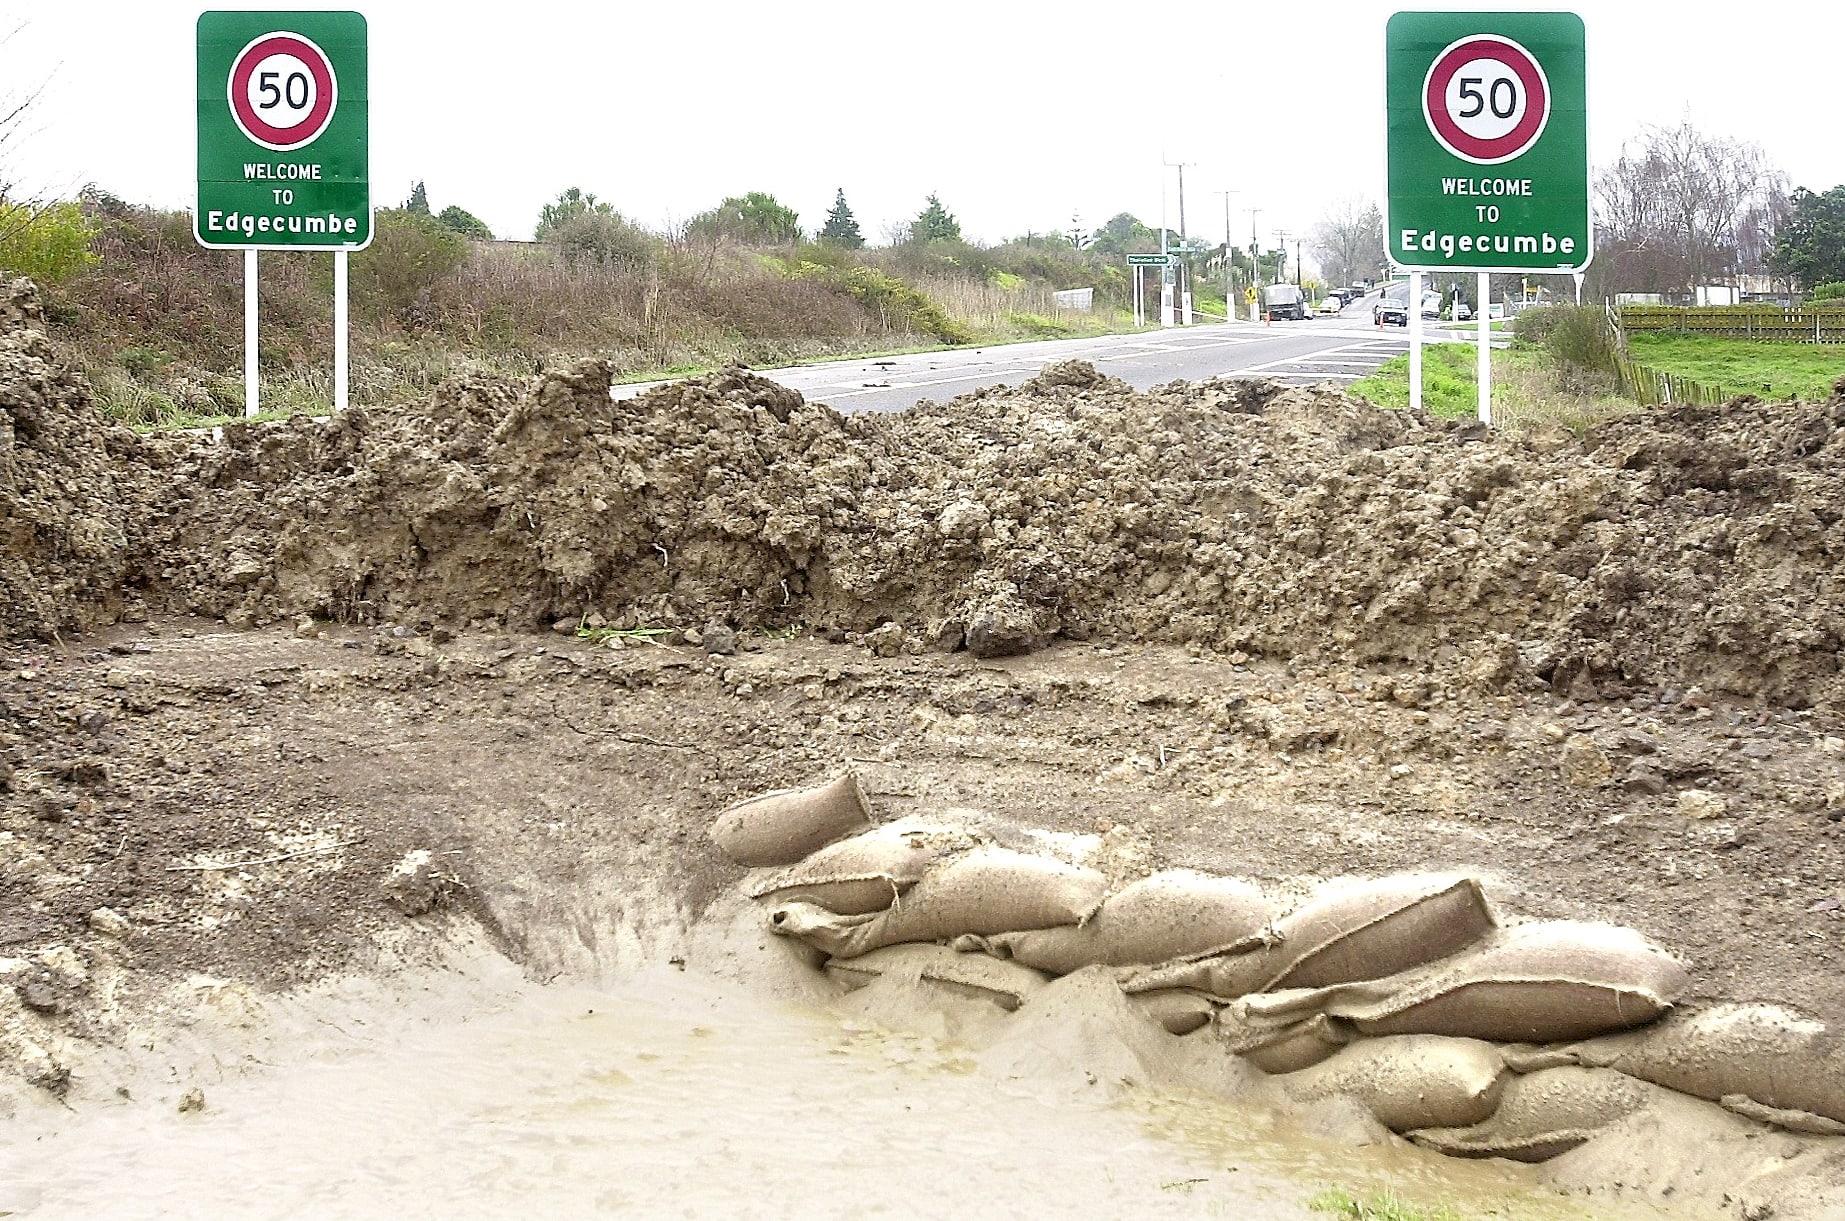 Flooding in Edgecumbe and the surrounding area in 2004 forced 3000 people from their homes.